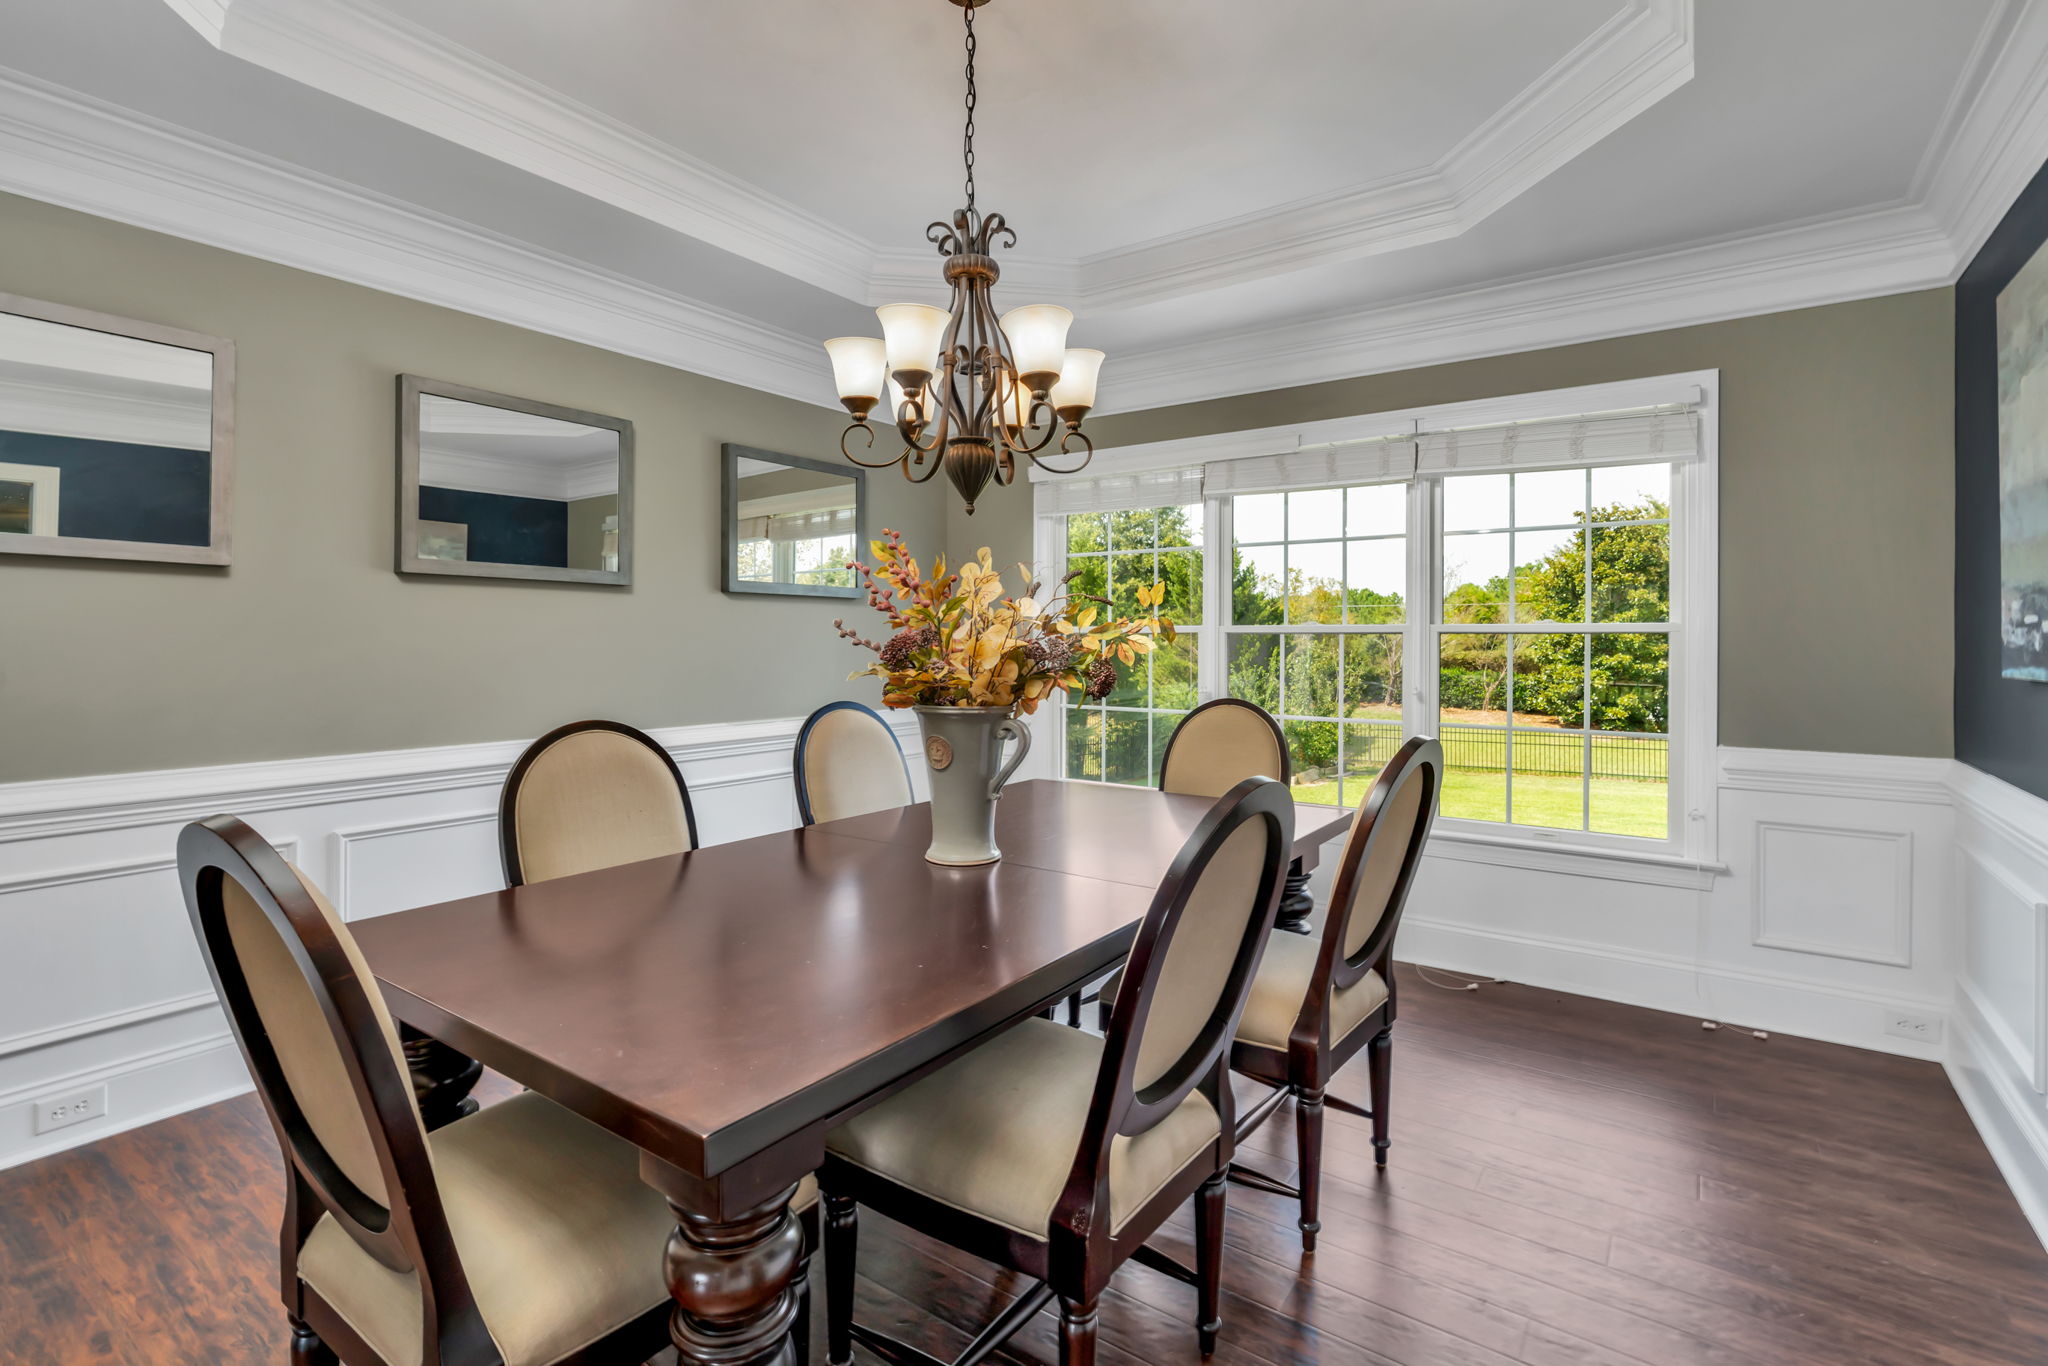 Elegant dining room with heavy crown molding, tray ceilings, chair rail and shadow box wainscoting.